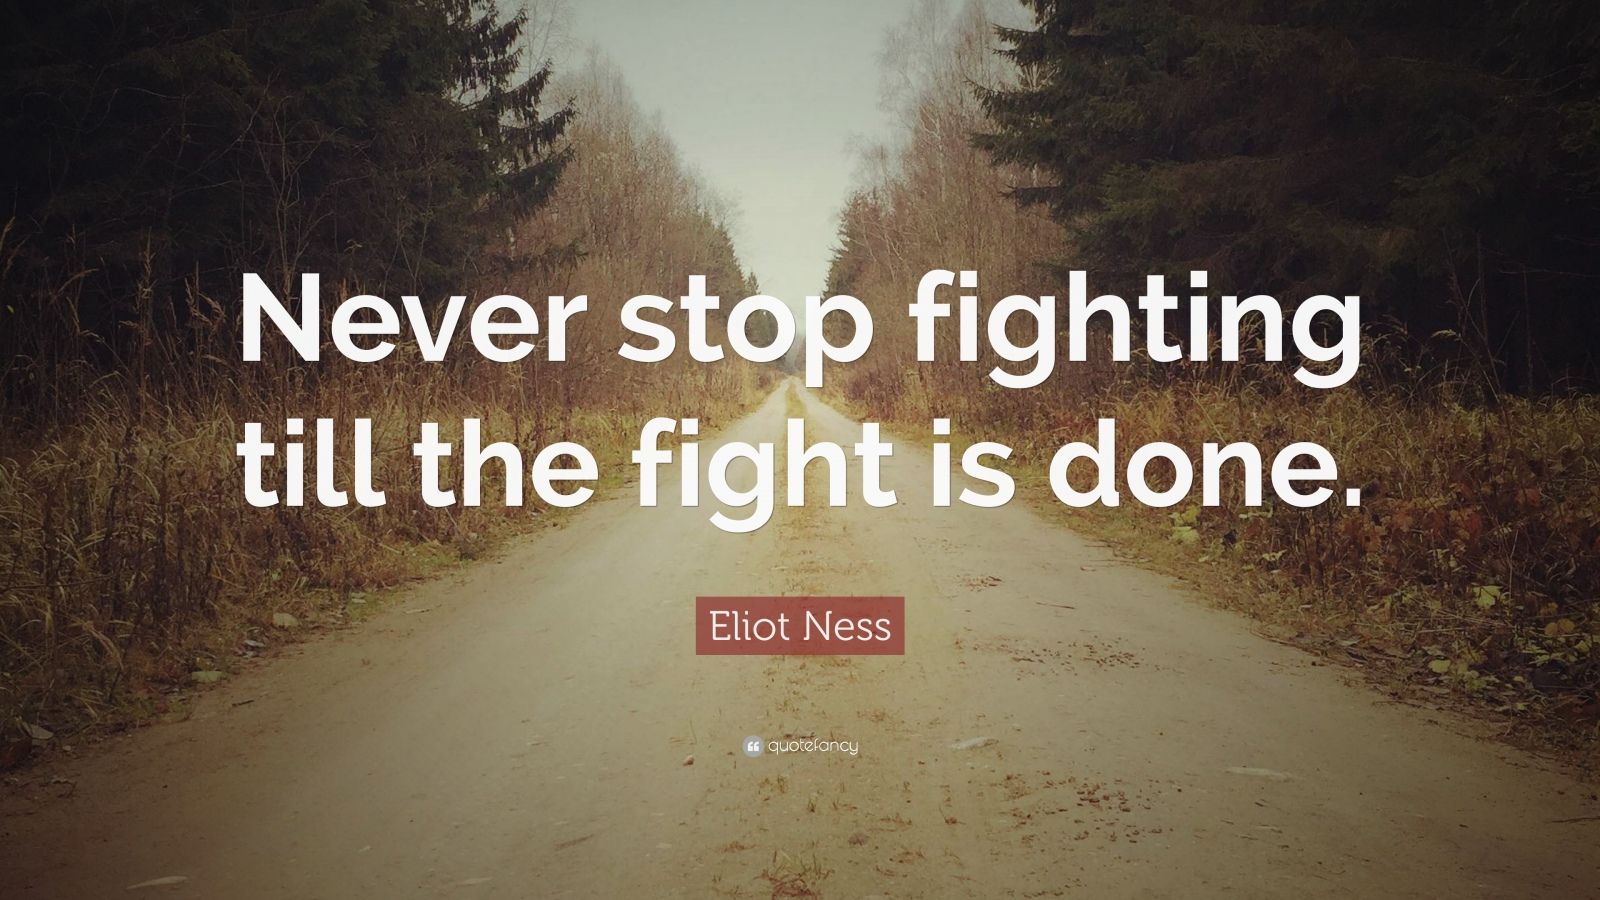 Eliot Ness Quote: “Never stop fighting till the fight is done.”